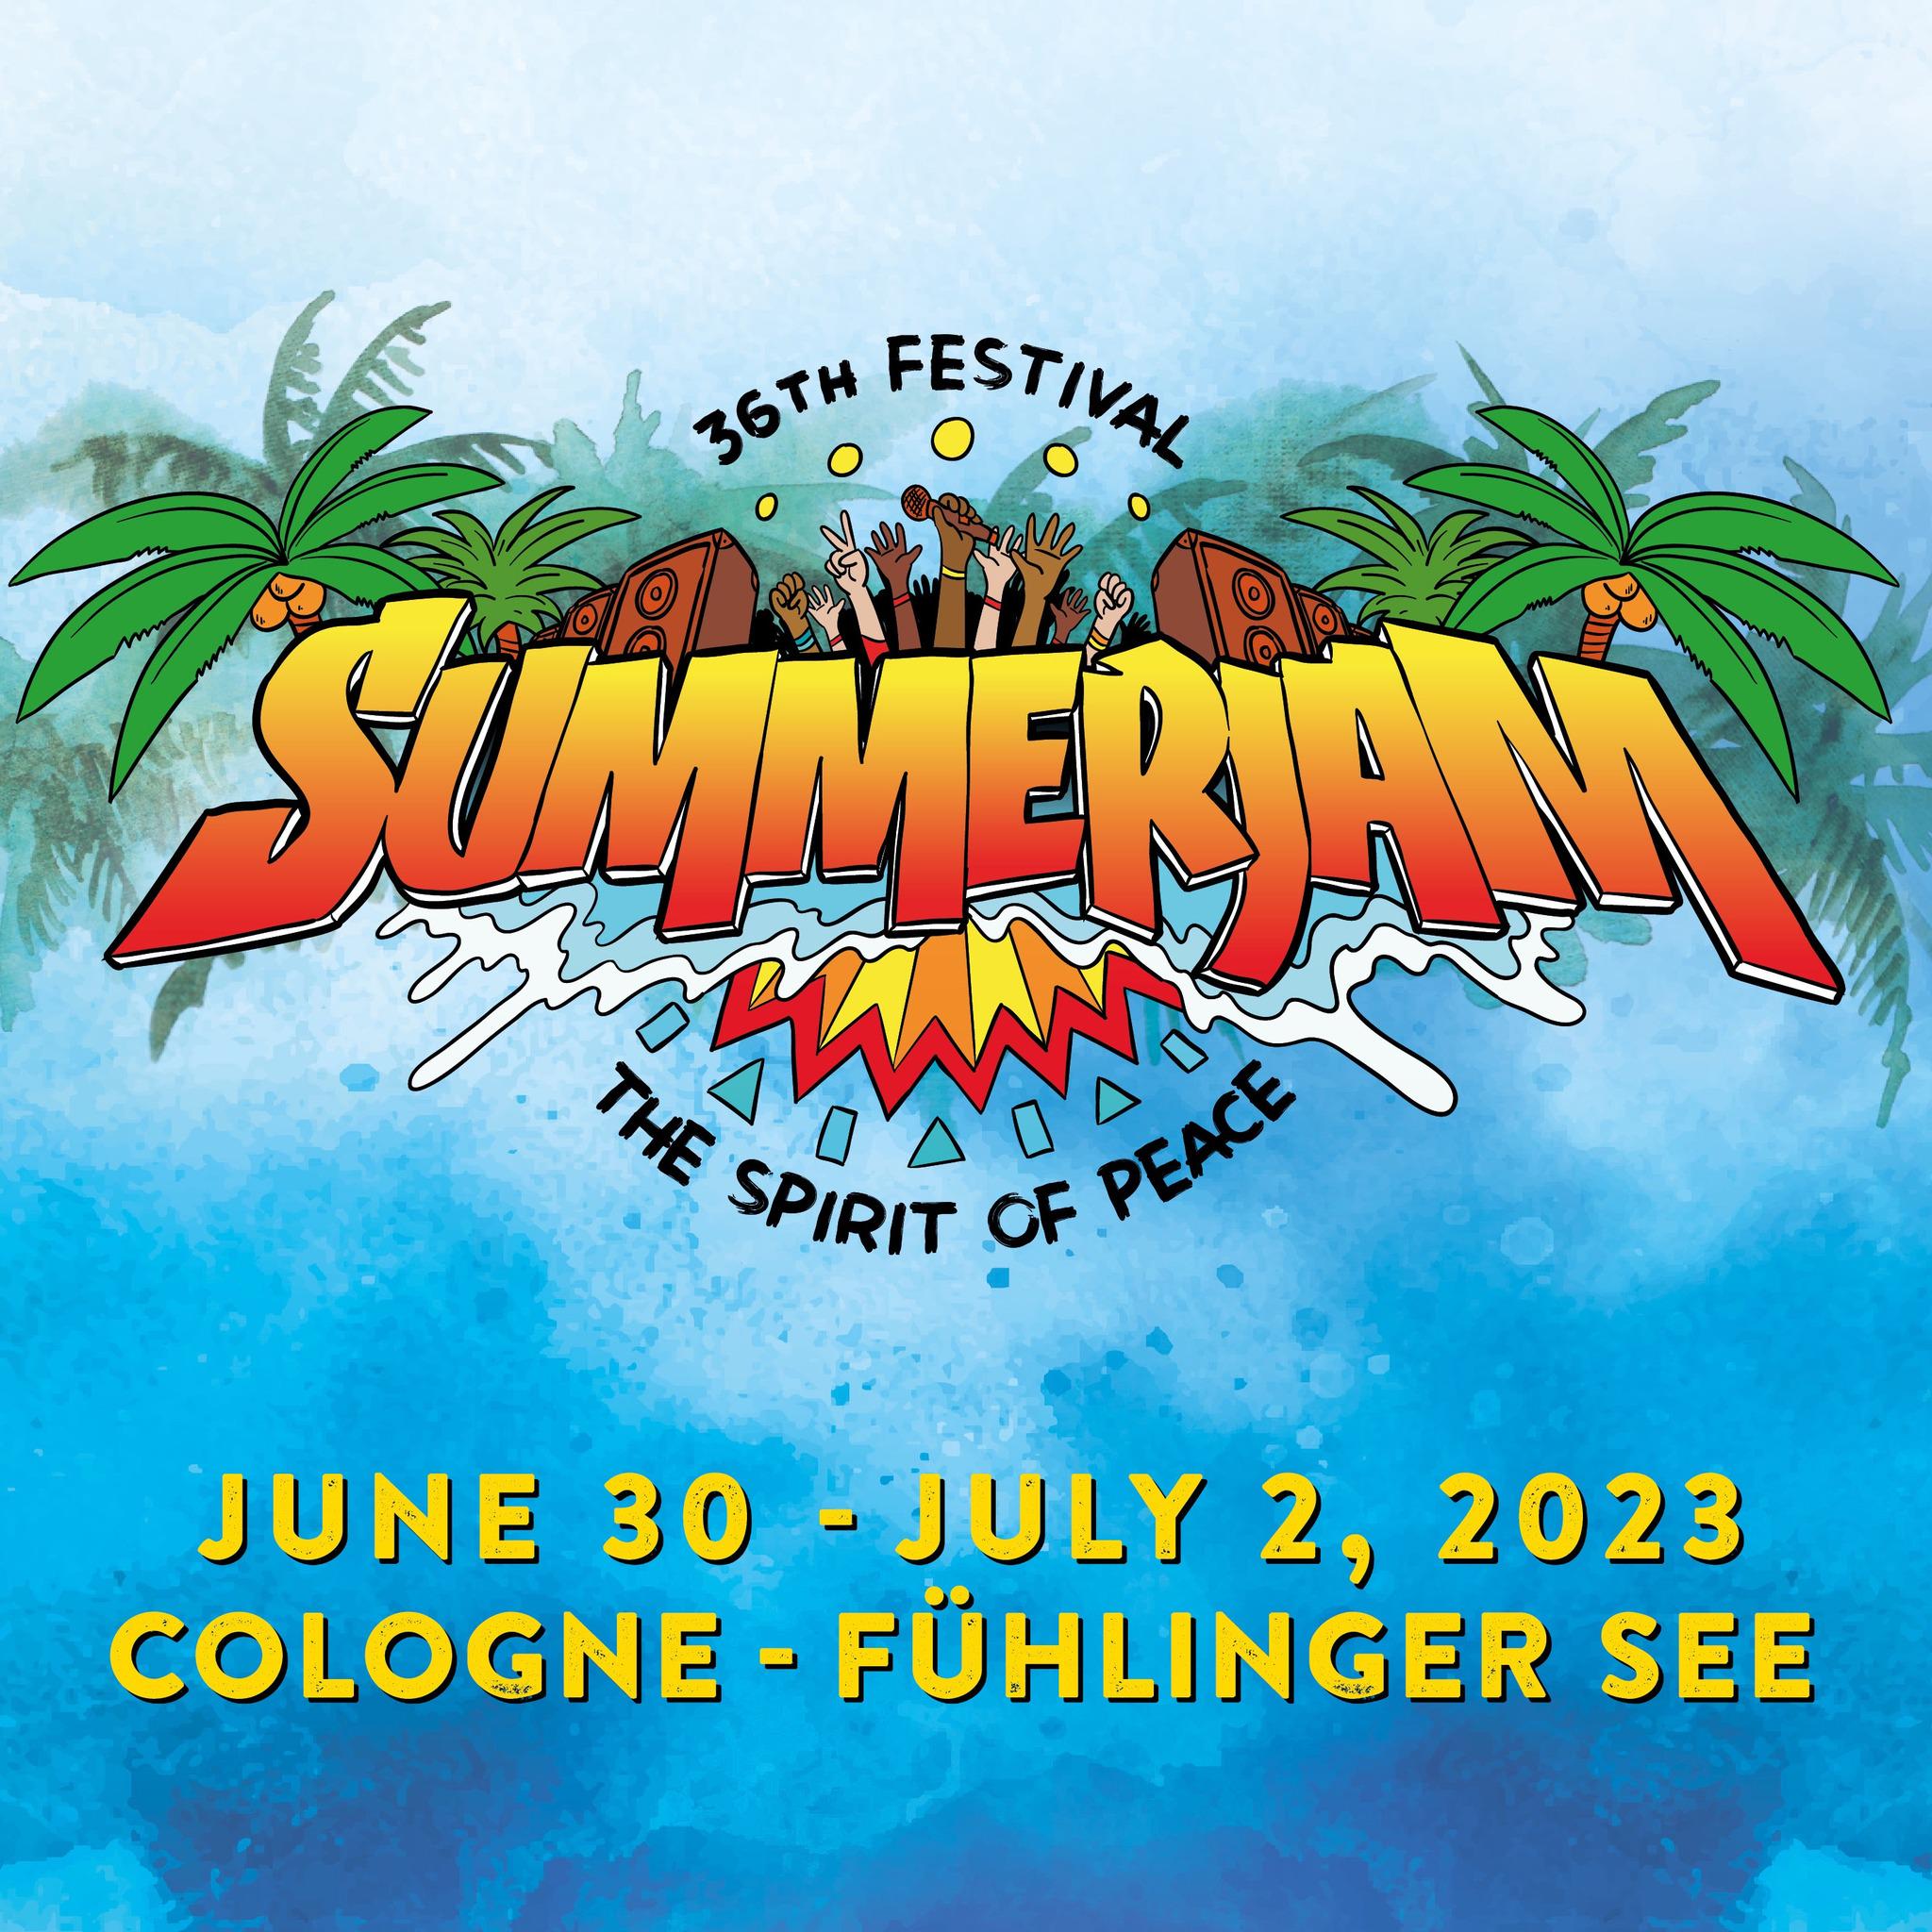 Summerjam Festival Festival Lineup, Dates and Location